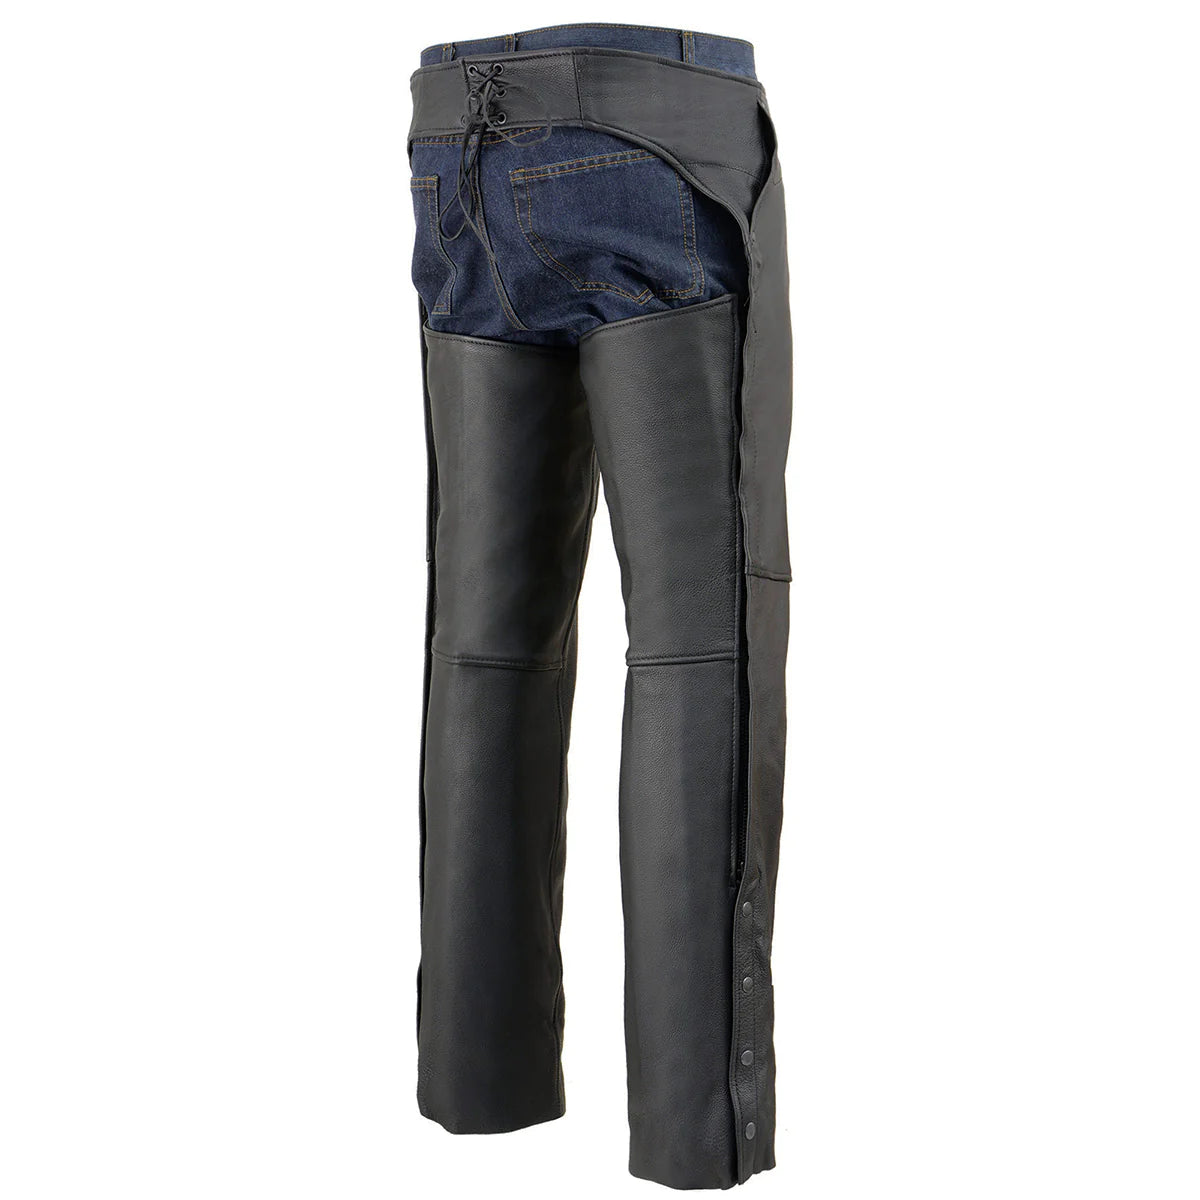 Men's Black 3-Pocket Leather Chaps with Thigh Patch Pocket